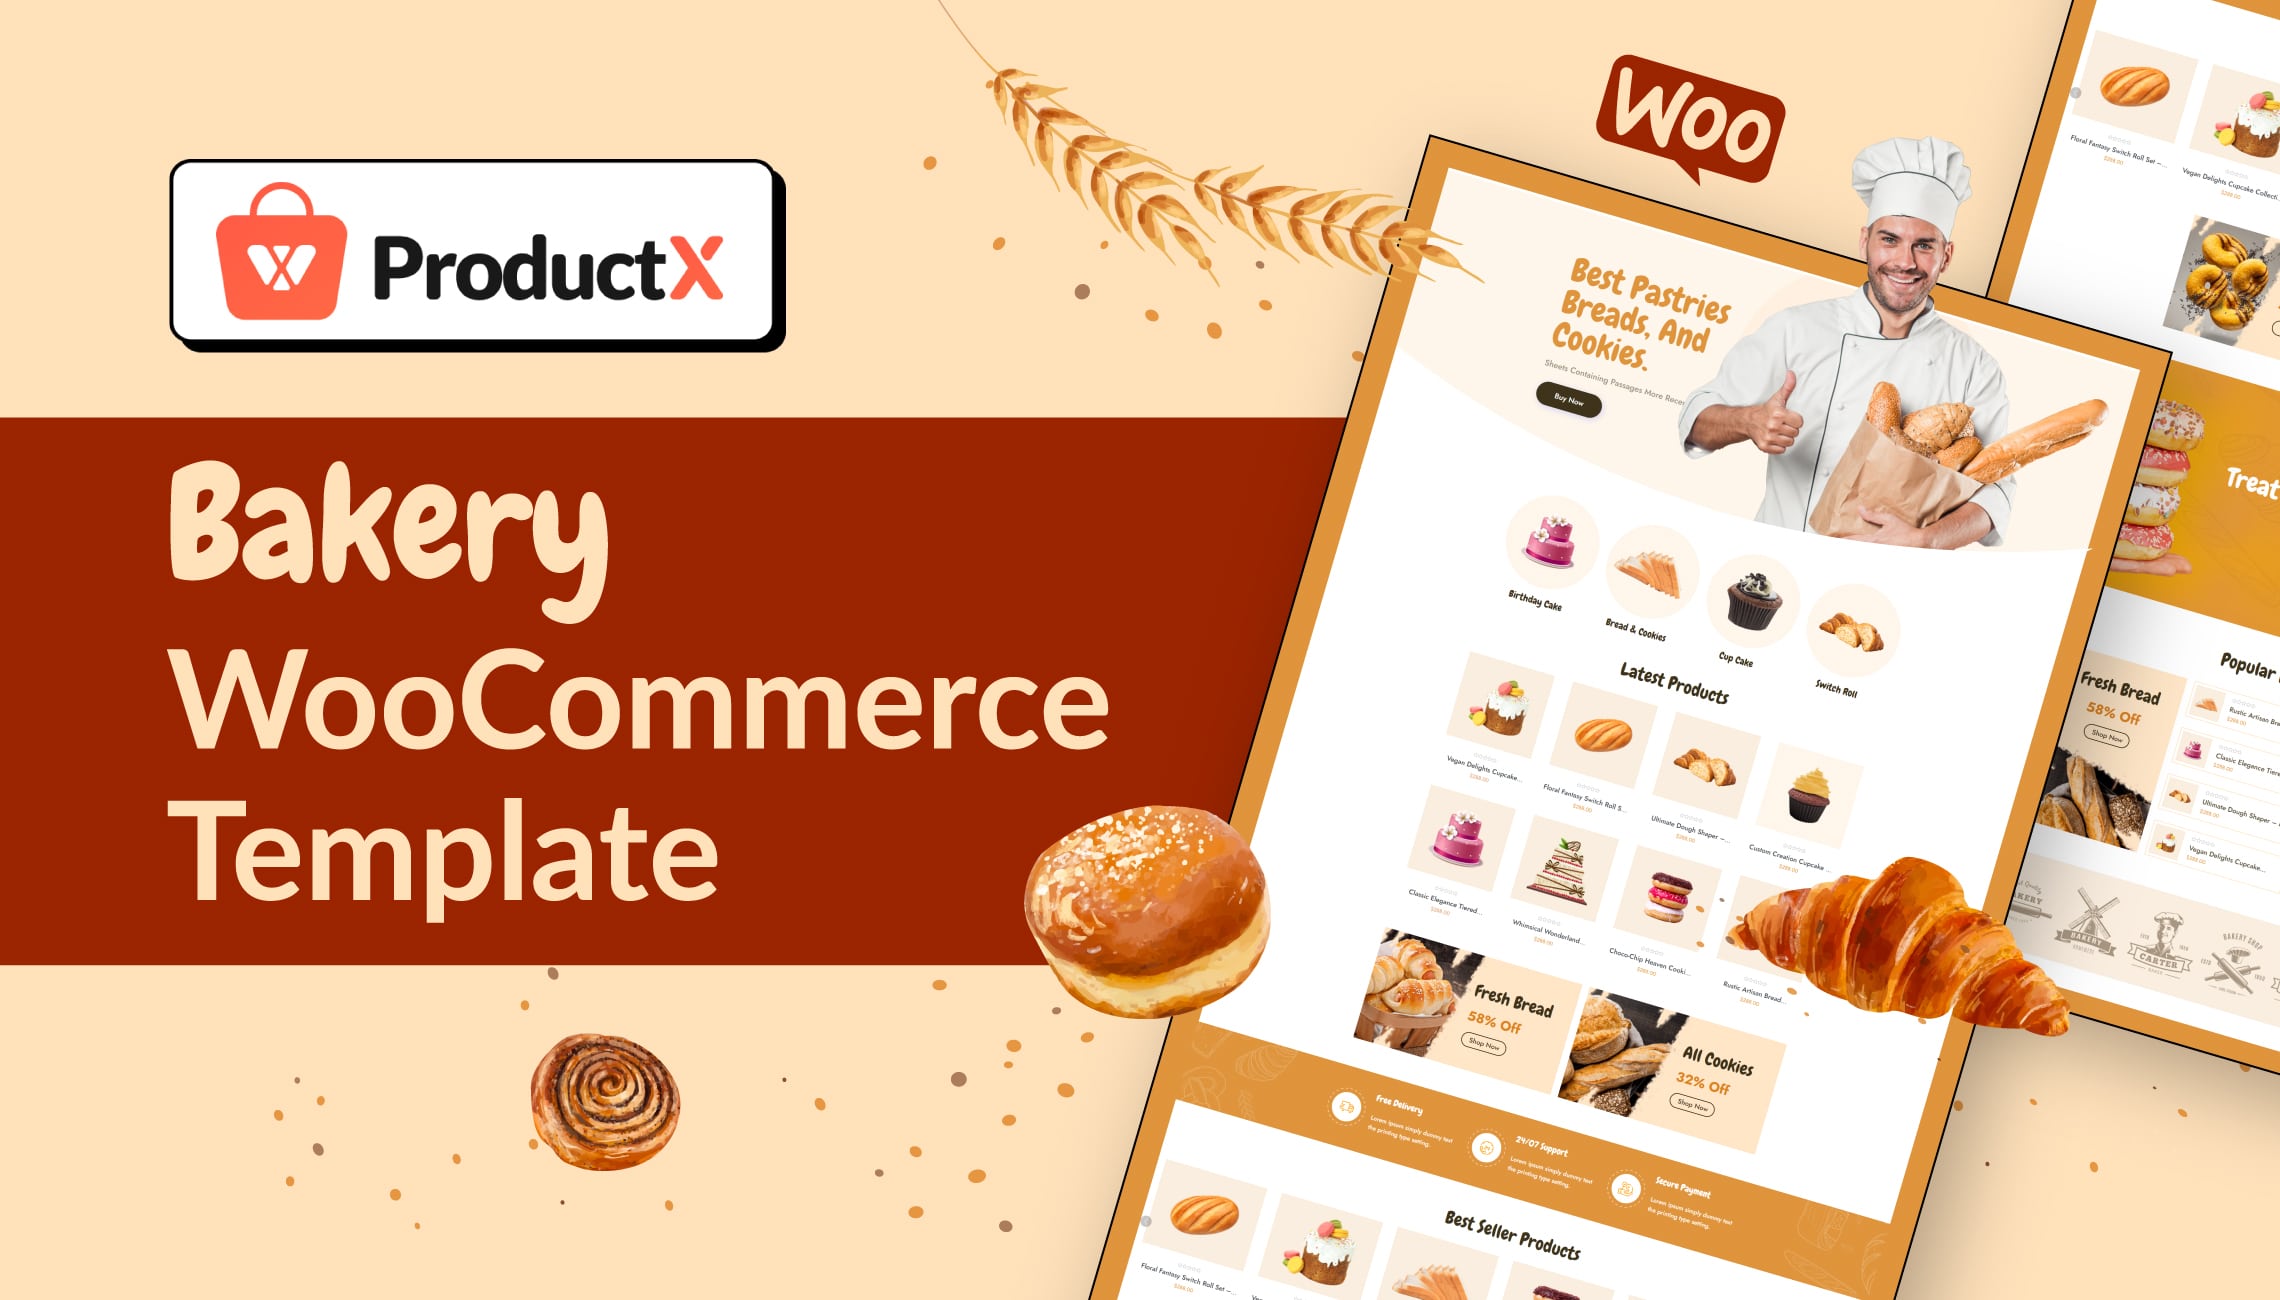 Introducing Bakery Template for WooCommerce Stores